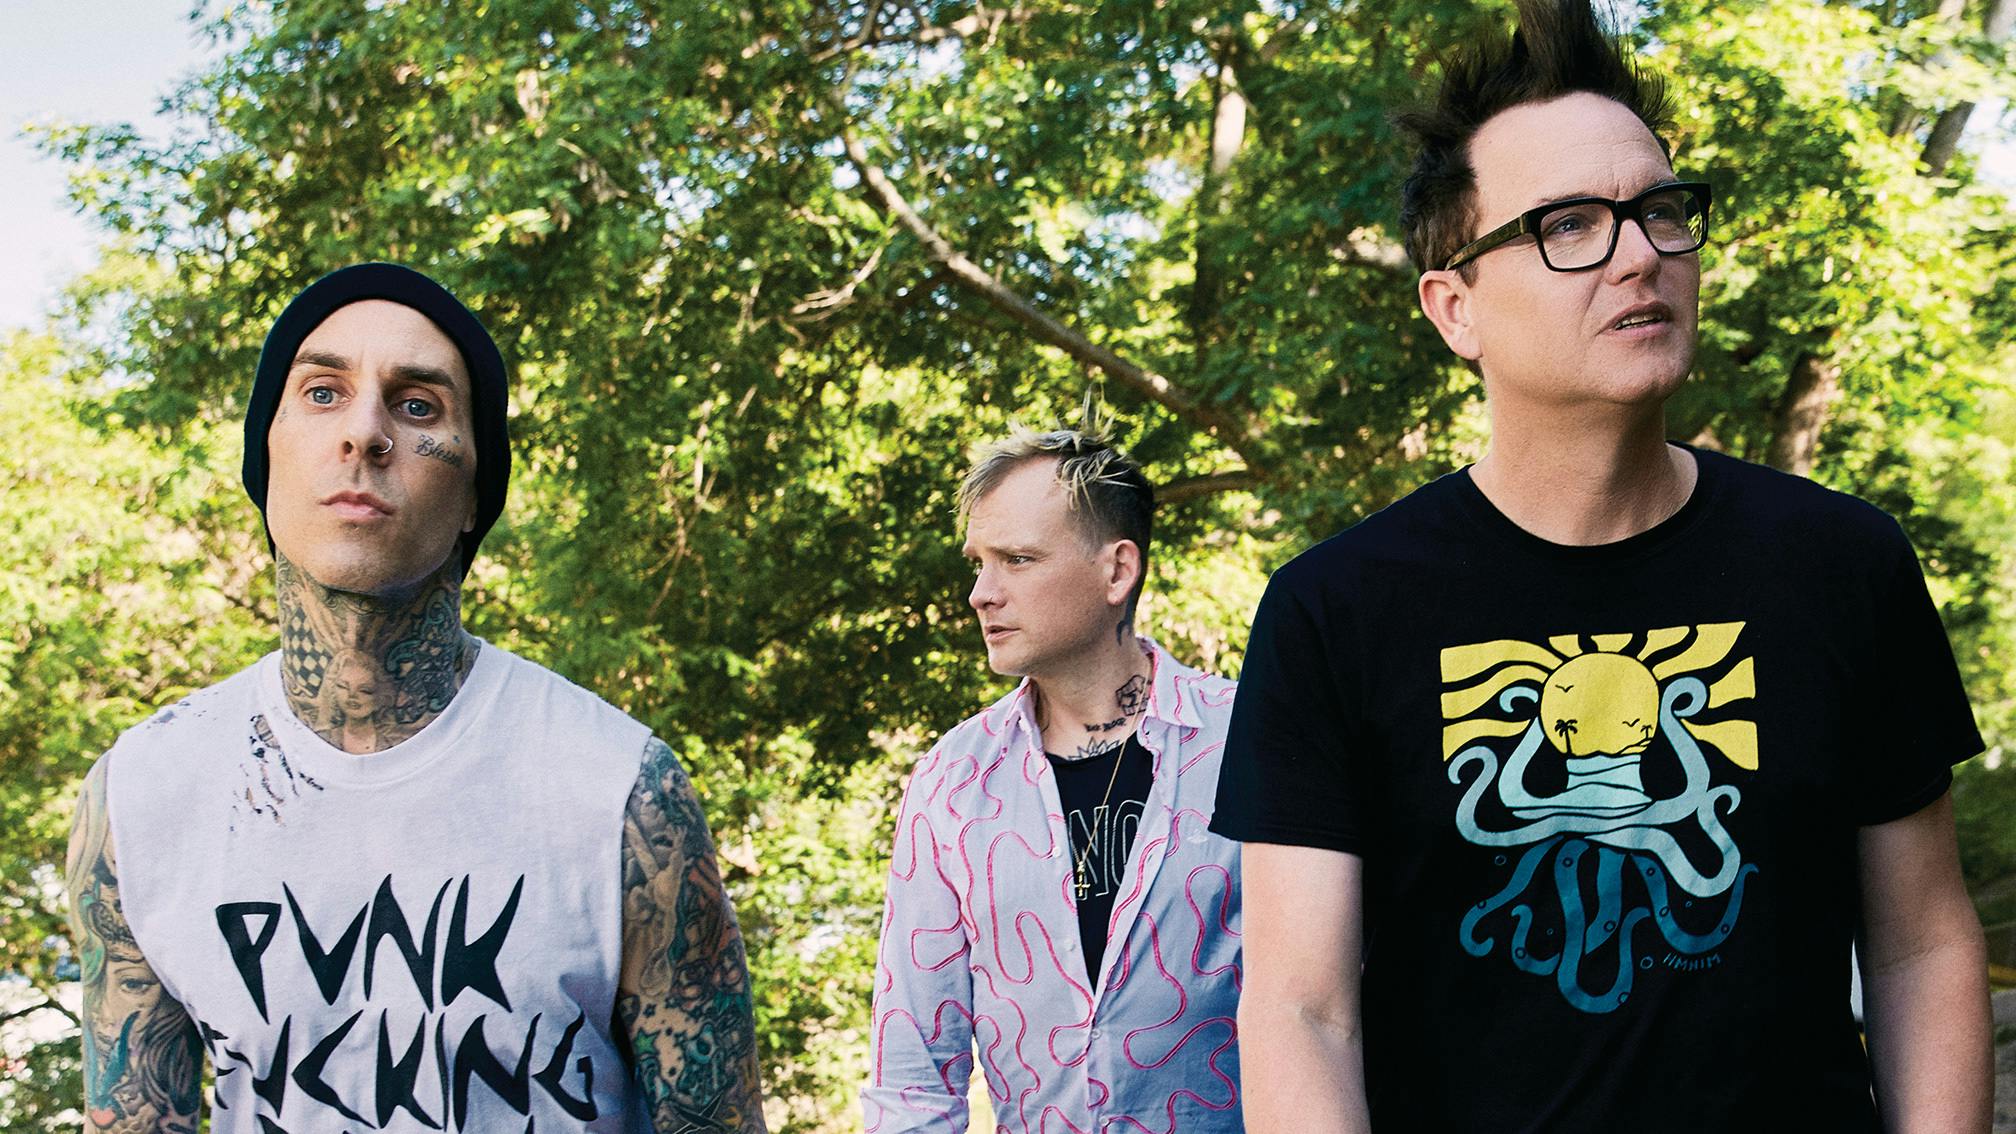 Matt Skiba says he’s “truly grateful” for time with blink-182 in new statement